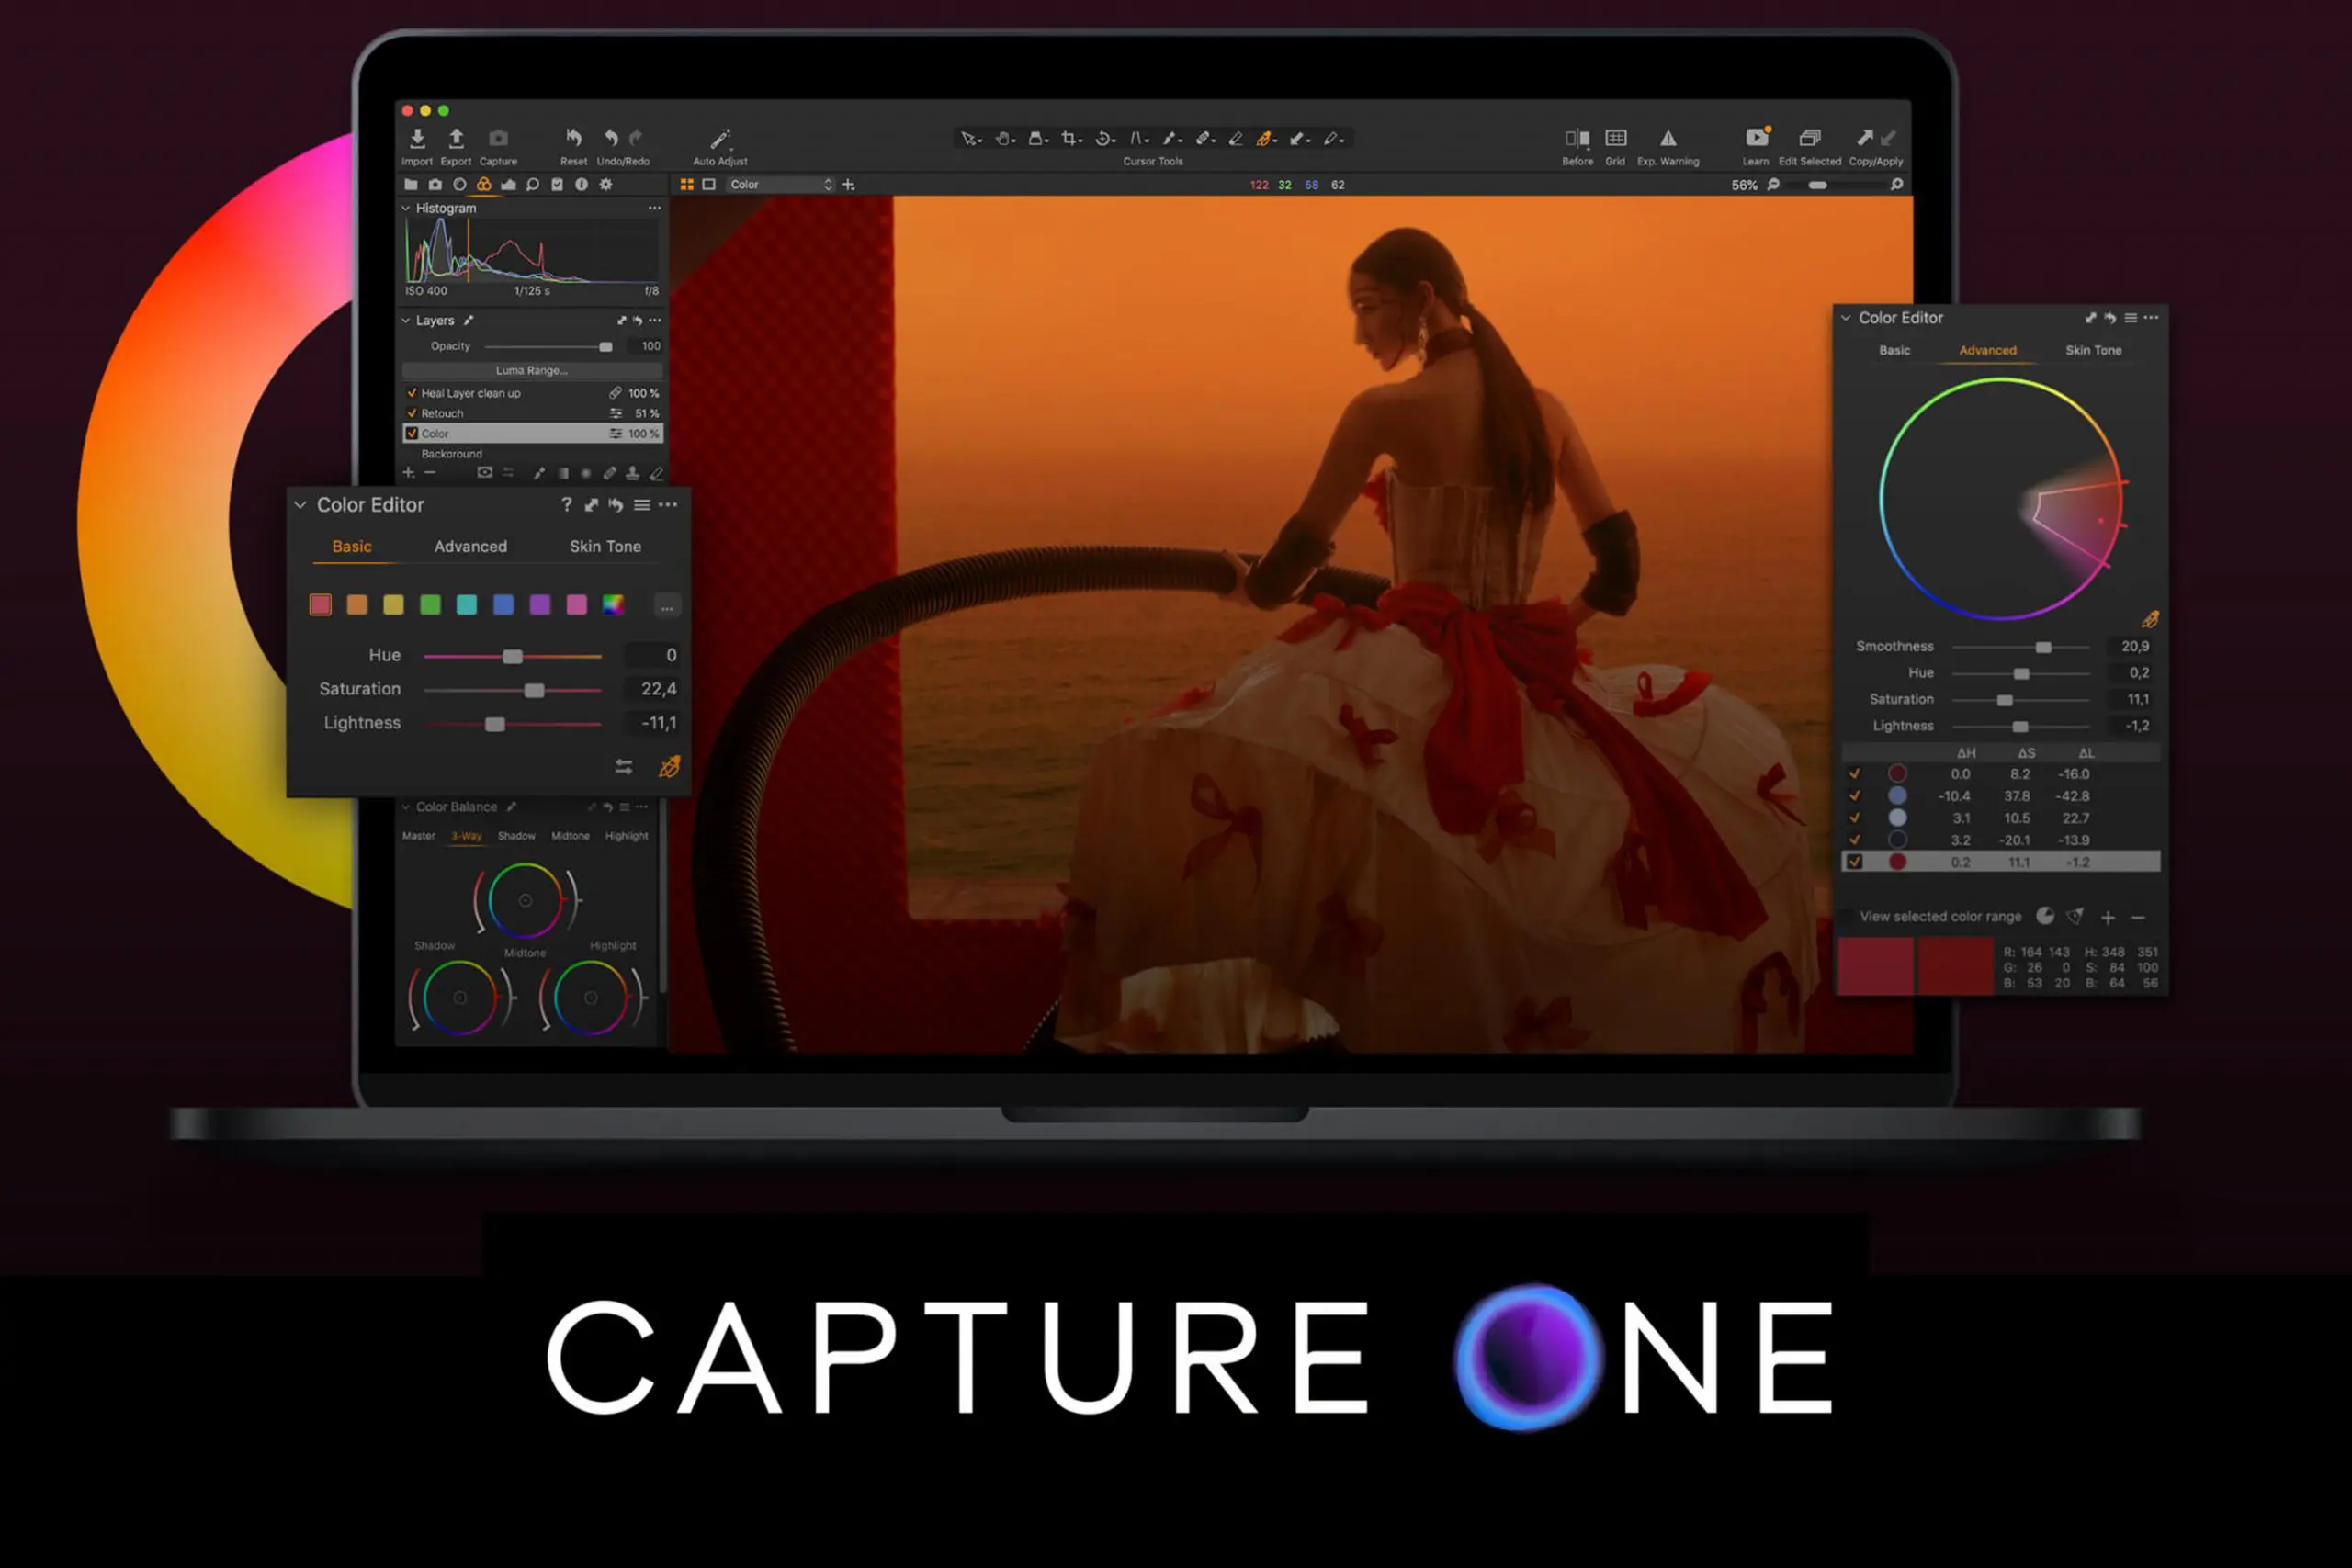 capture one software for photo editing